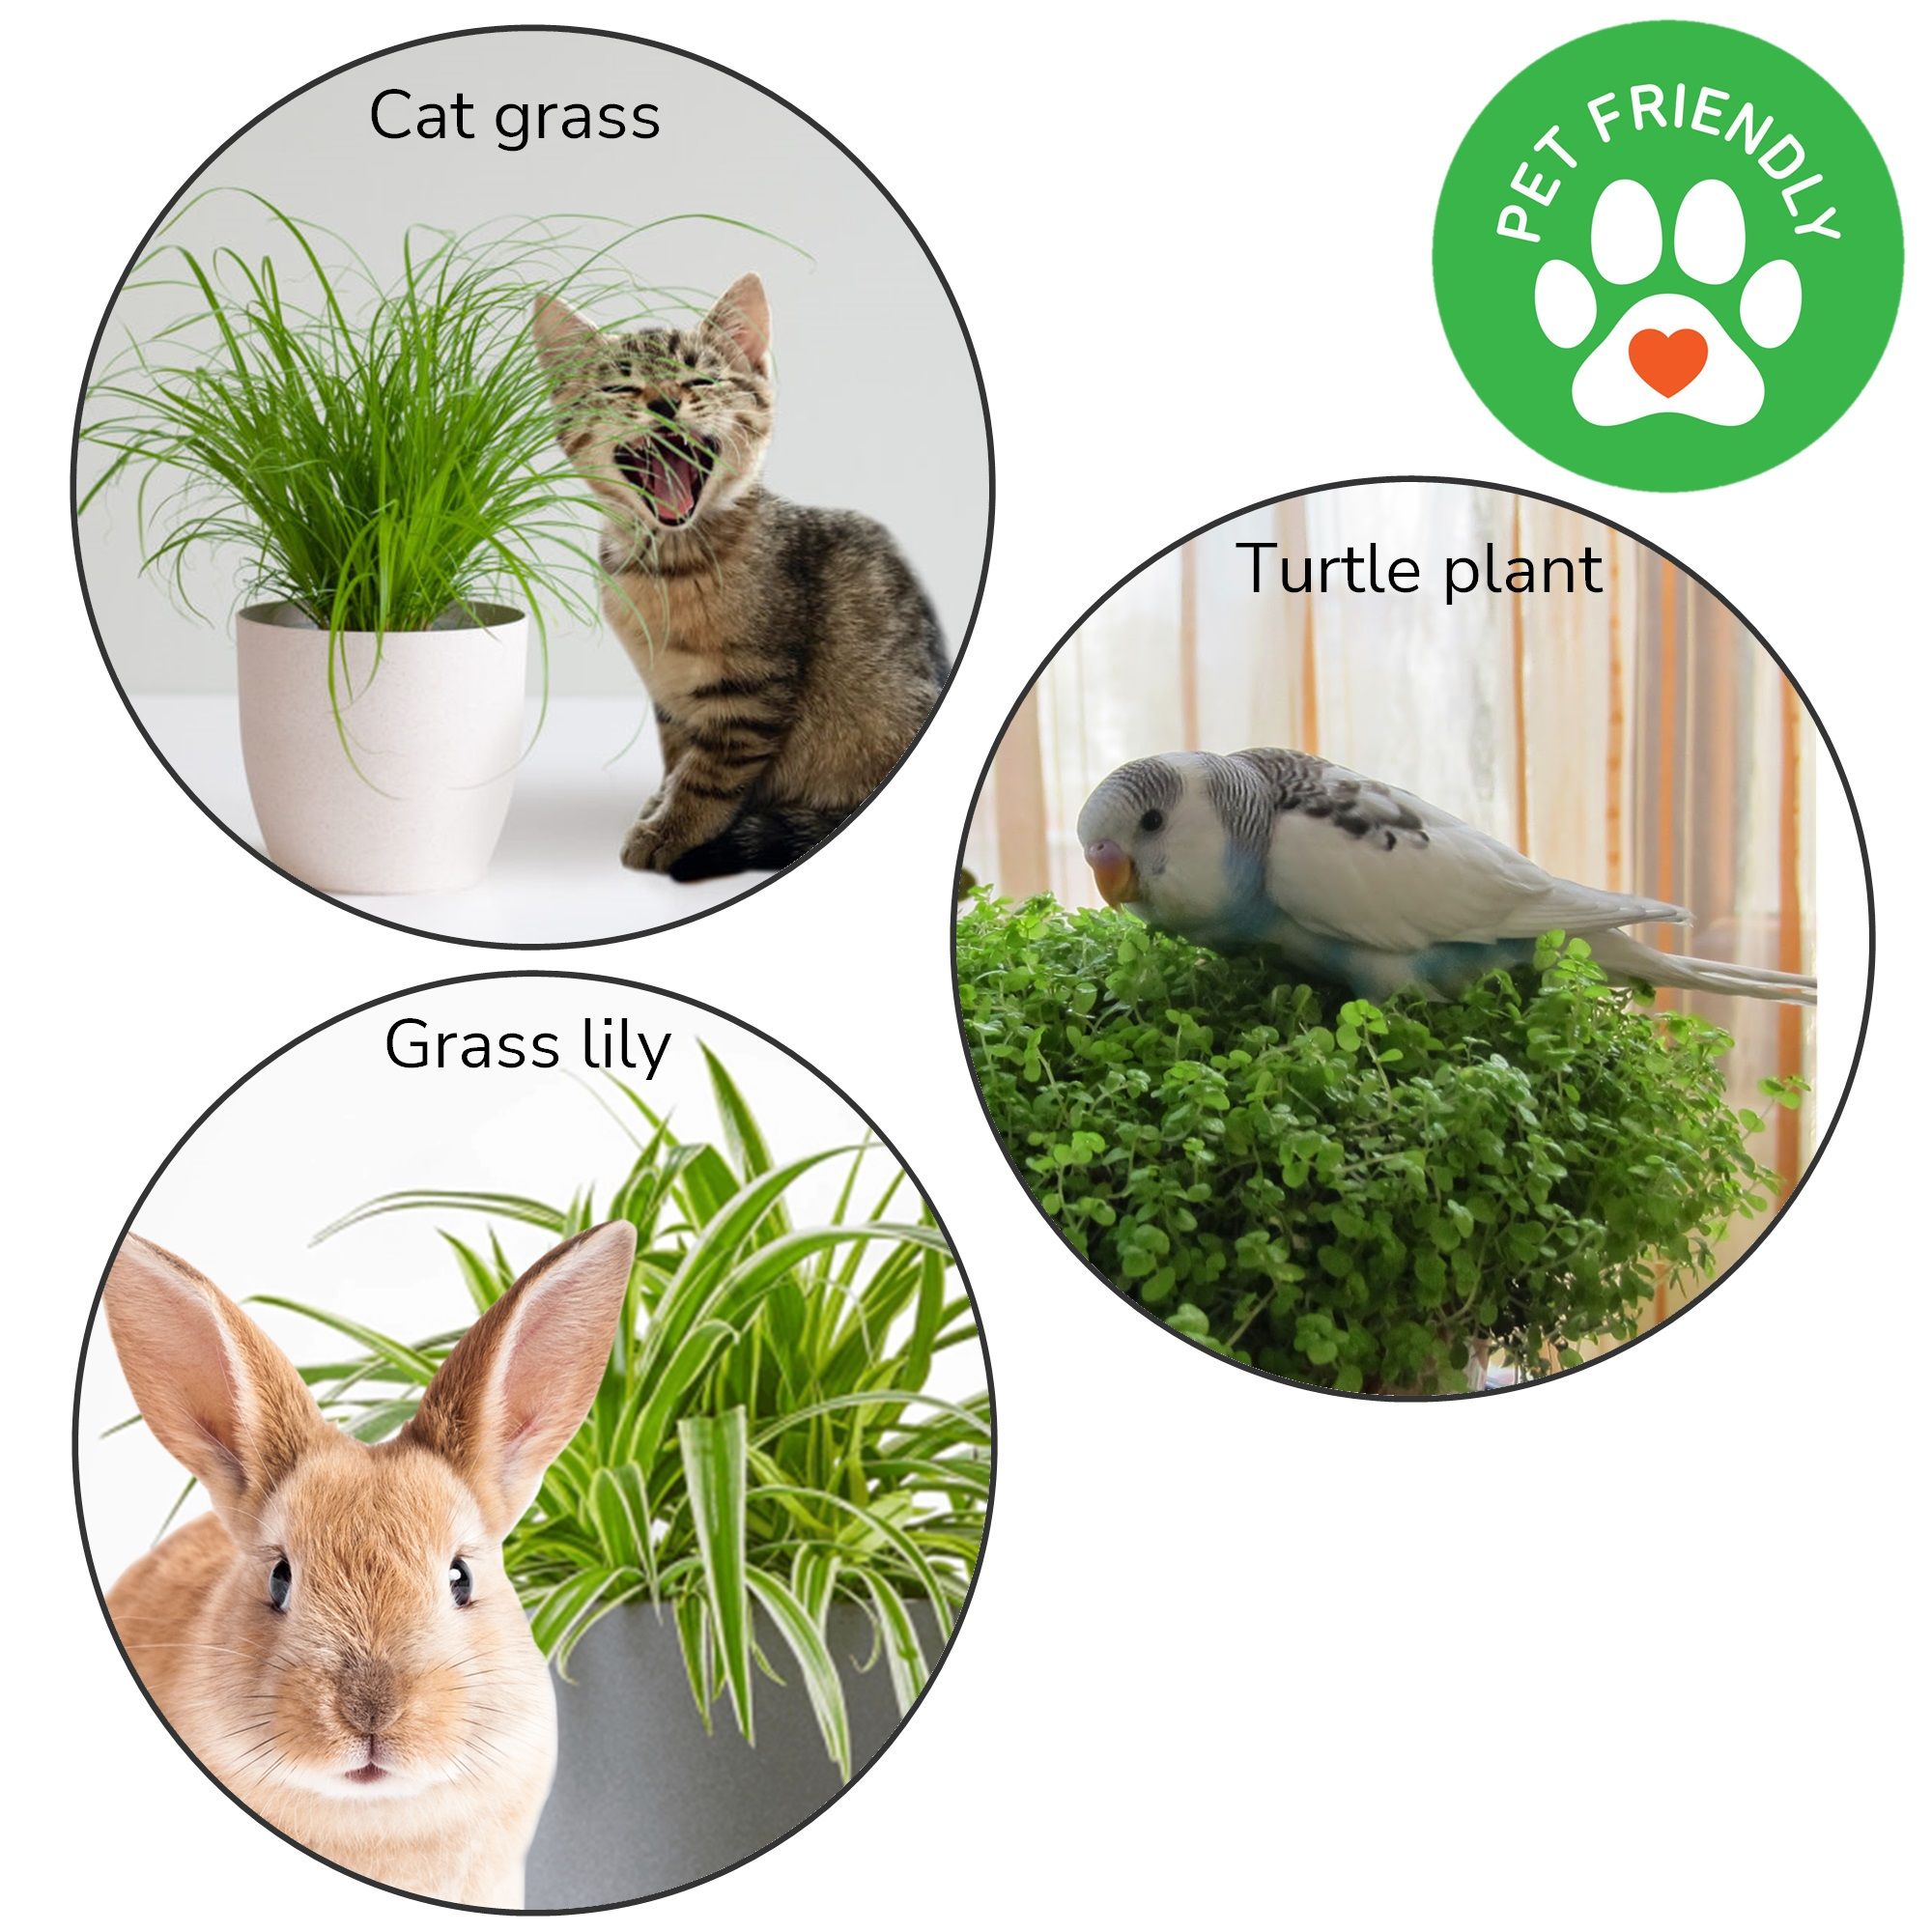 Turtle plant-Cat grass-and-grass-lily-animal-friendly-room-plants-set-in-eco-pots-4-pieces-2